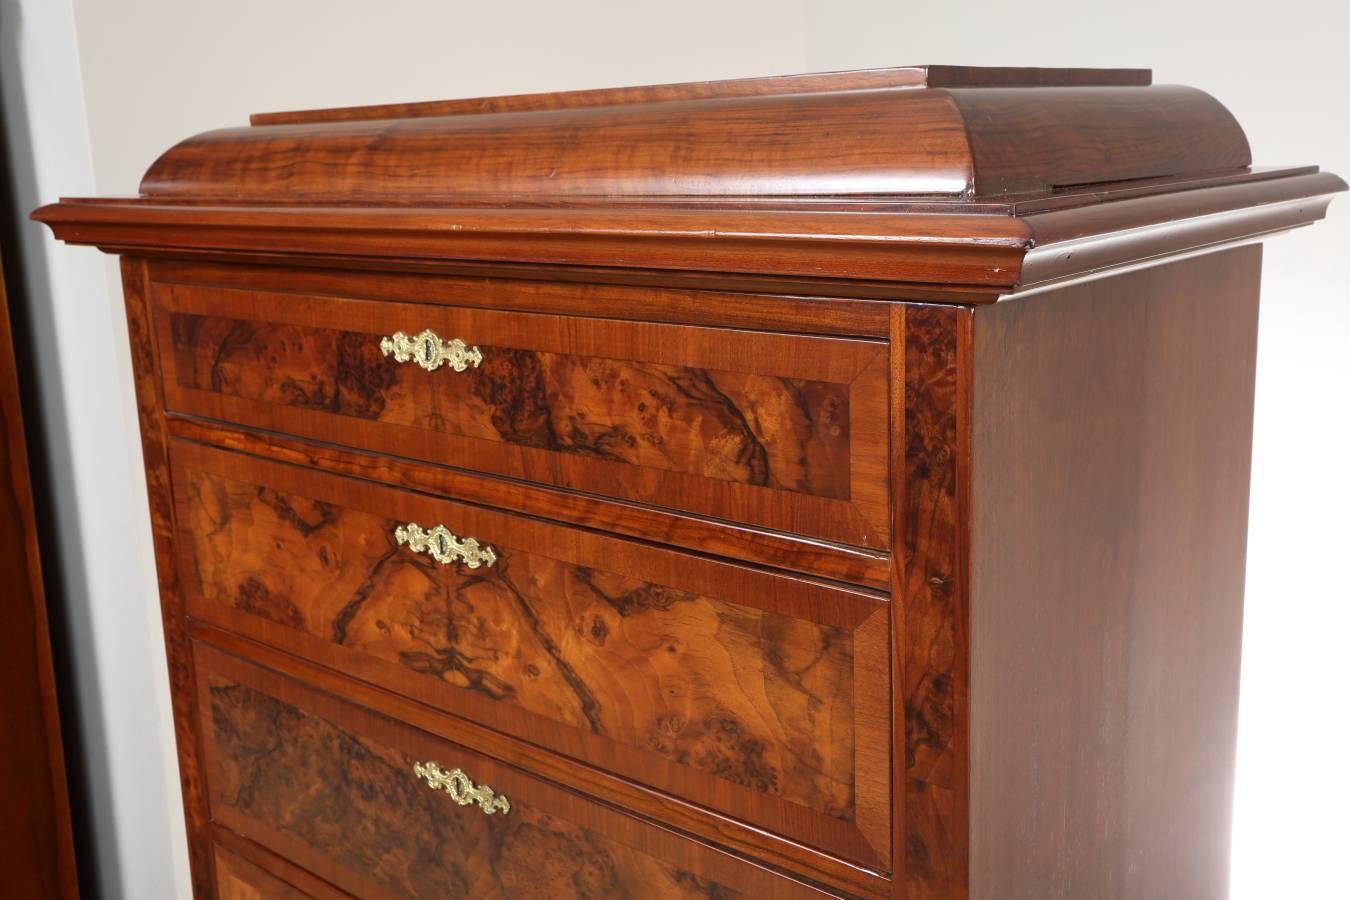 Chest of drawers in walnut root veneer, circa 1880. Caucasian walnut root veneer, professionally restored with respect for original color and patina, and finished in semi gloss lacquer. All keys are included.